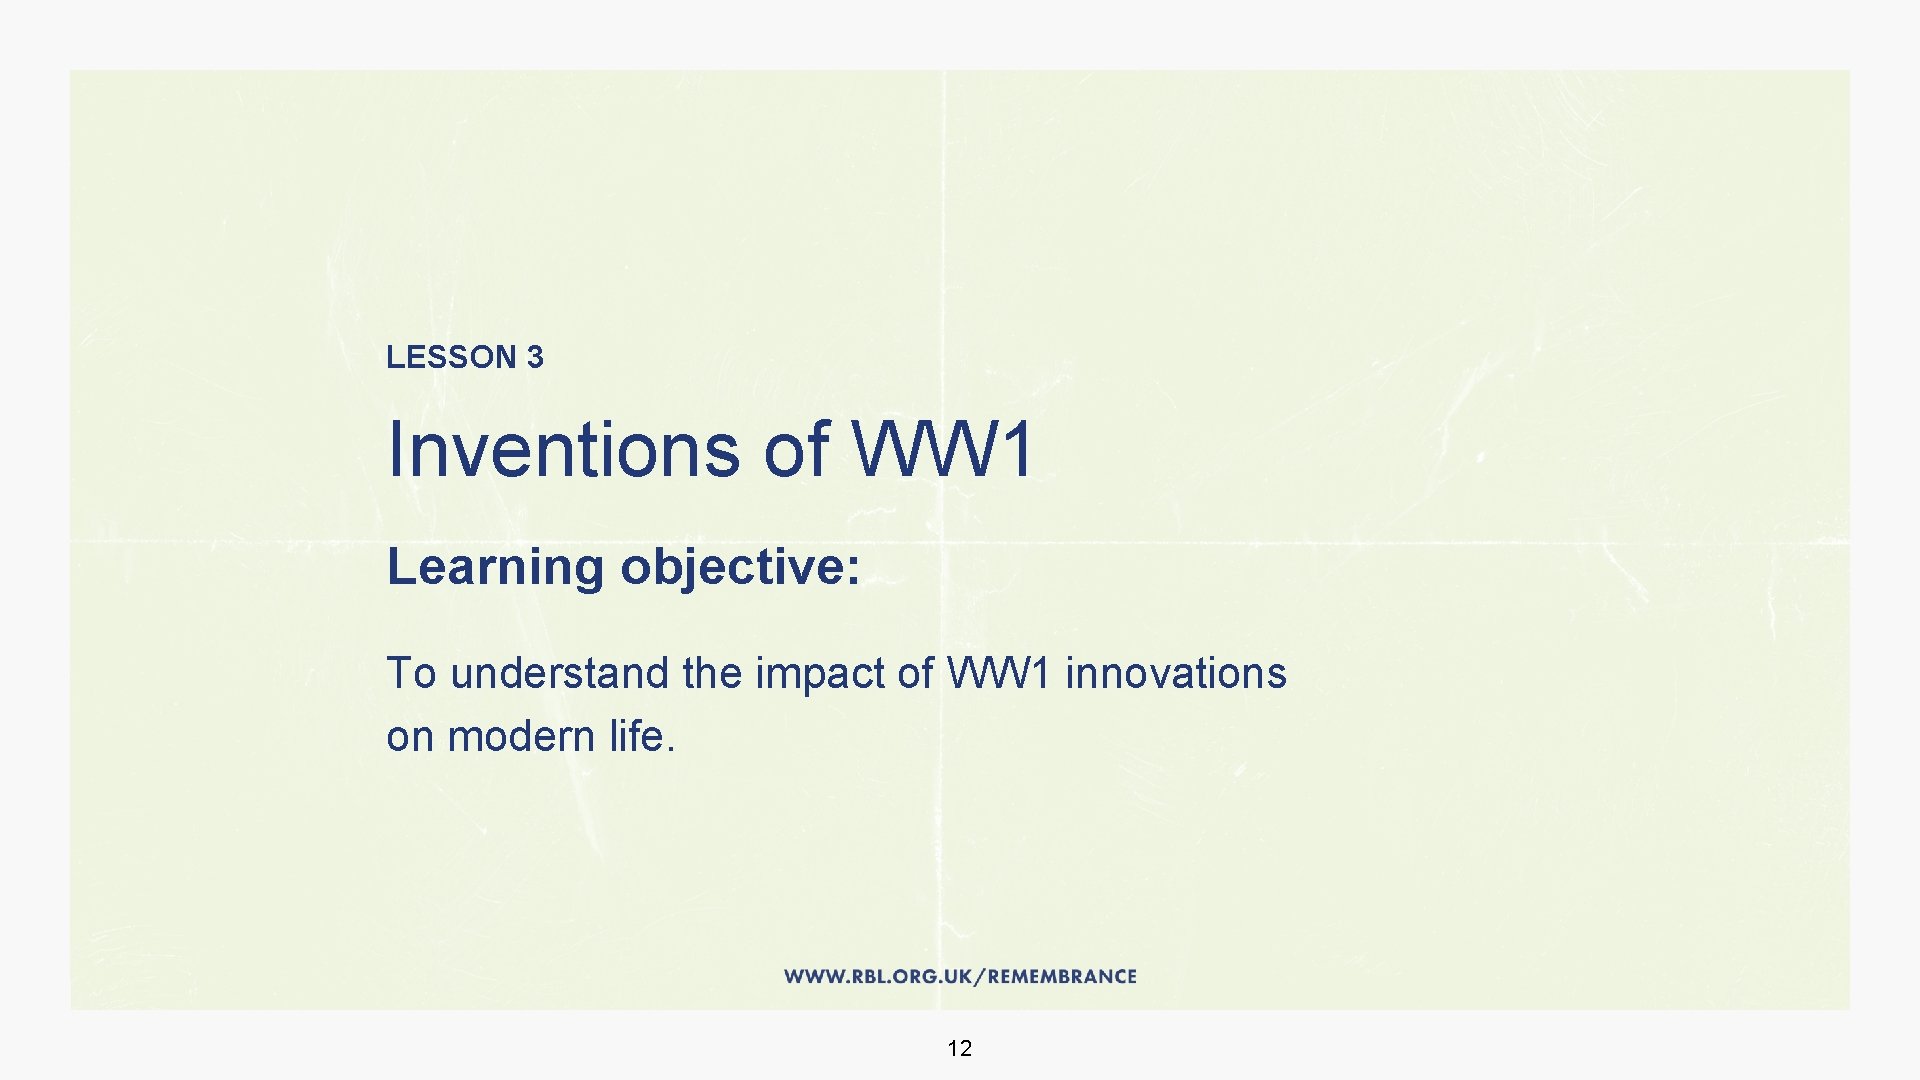 LESSON 3 Inventions of WW 1 Learning objective: To understand the impact of WW